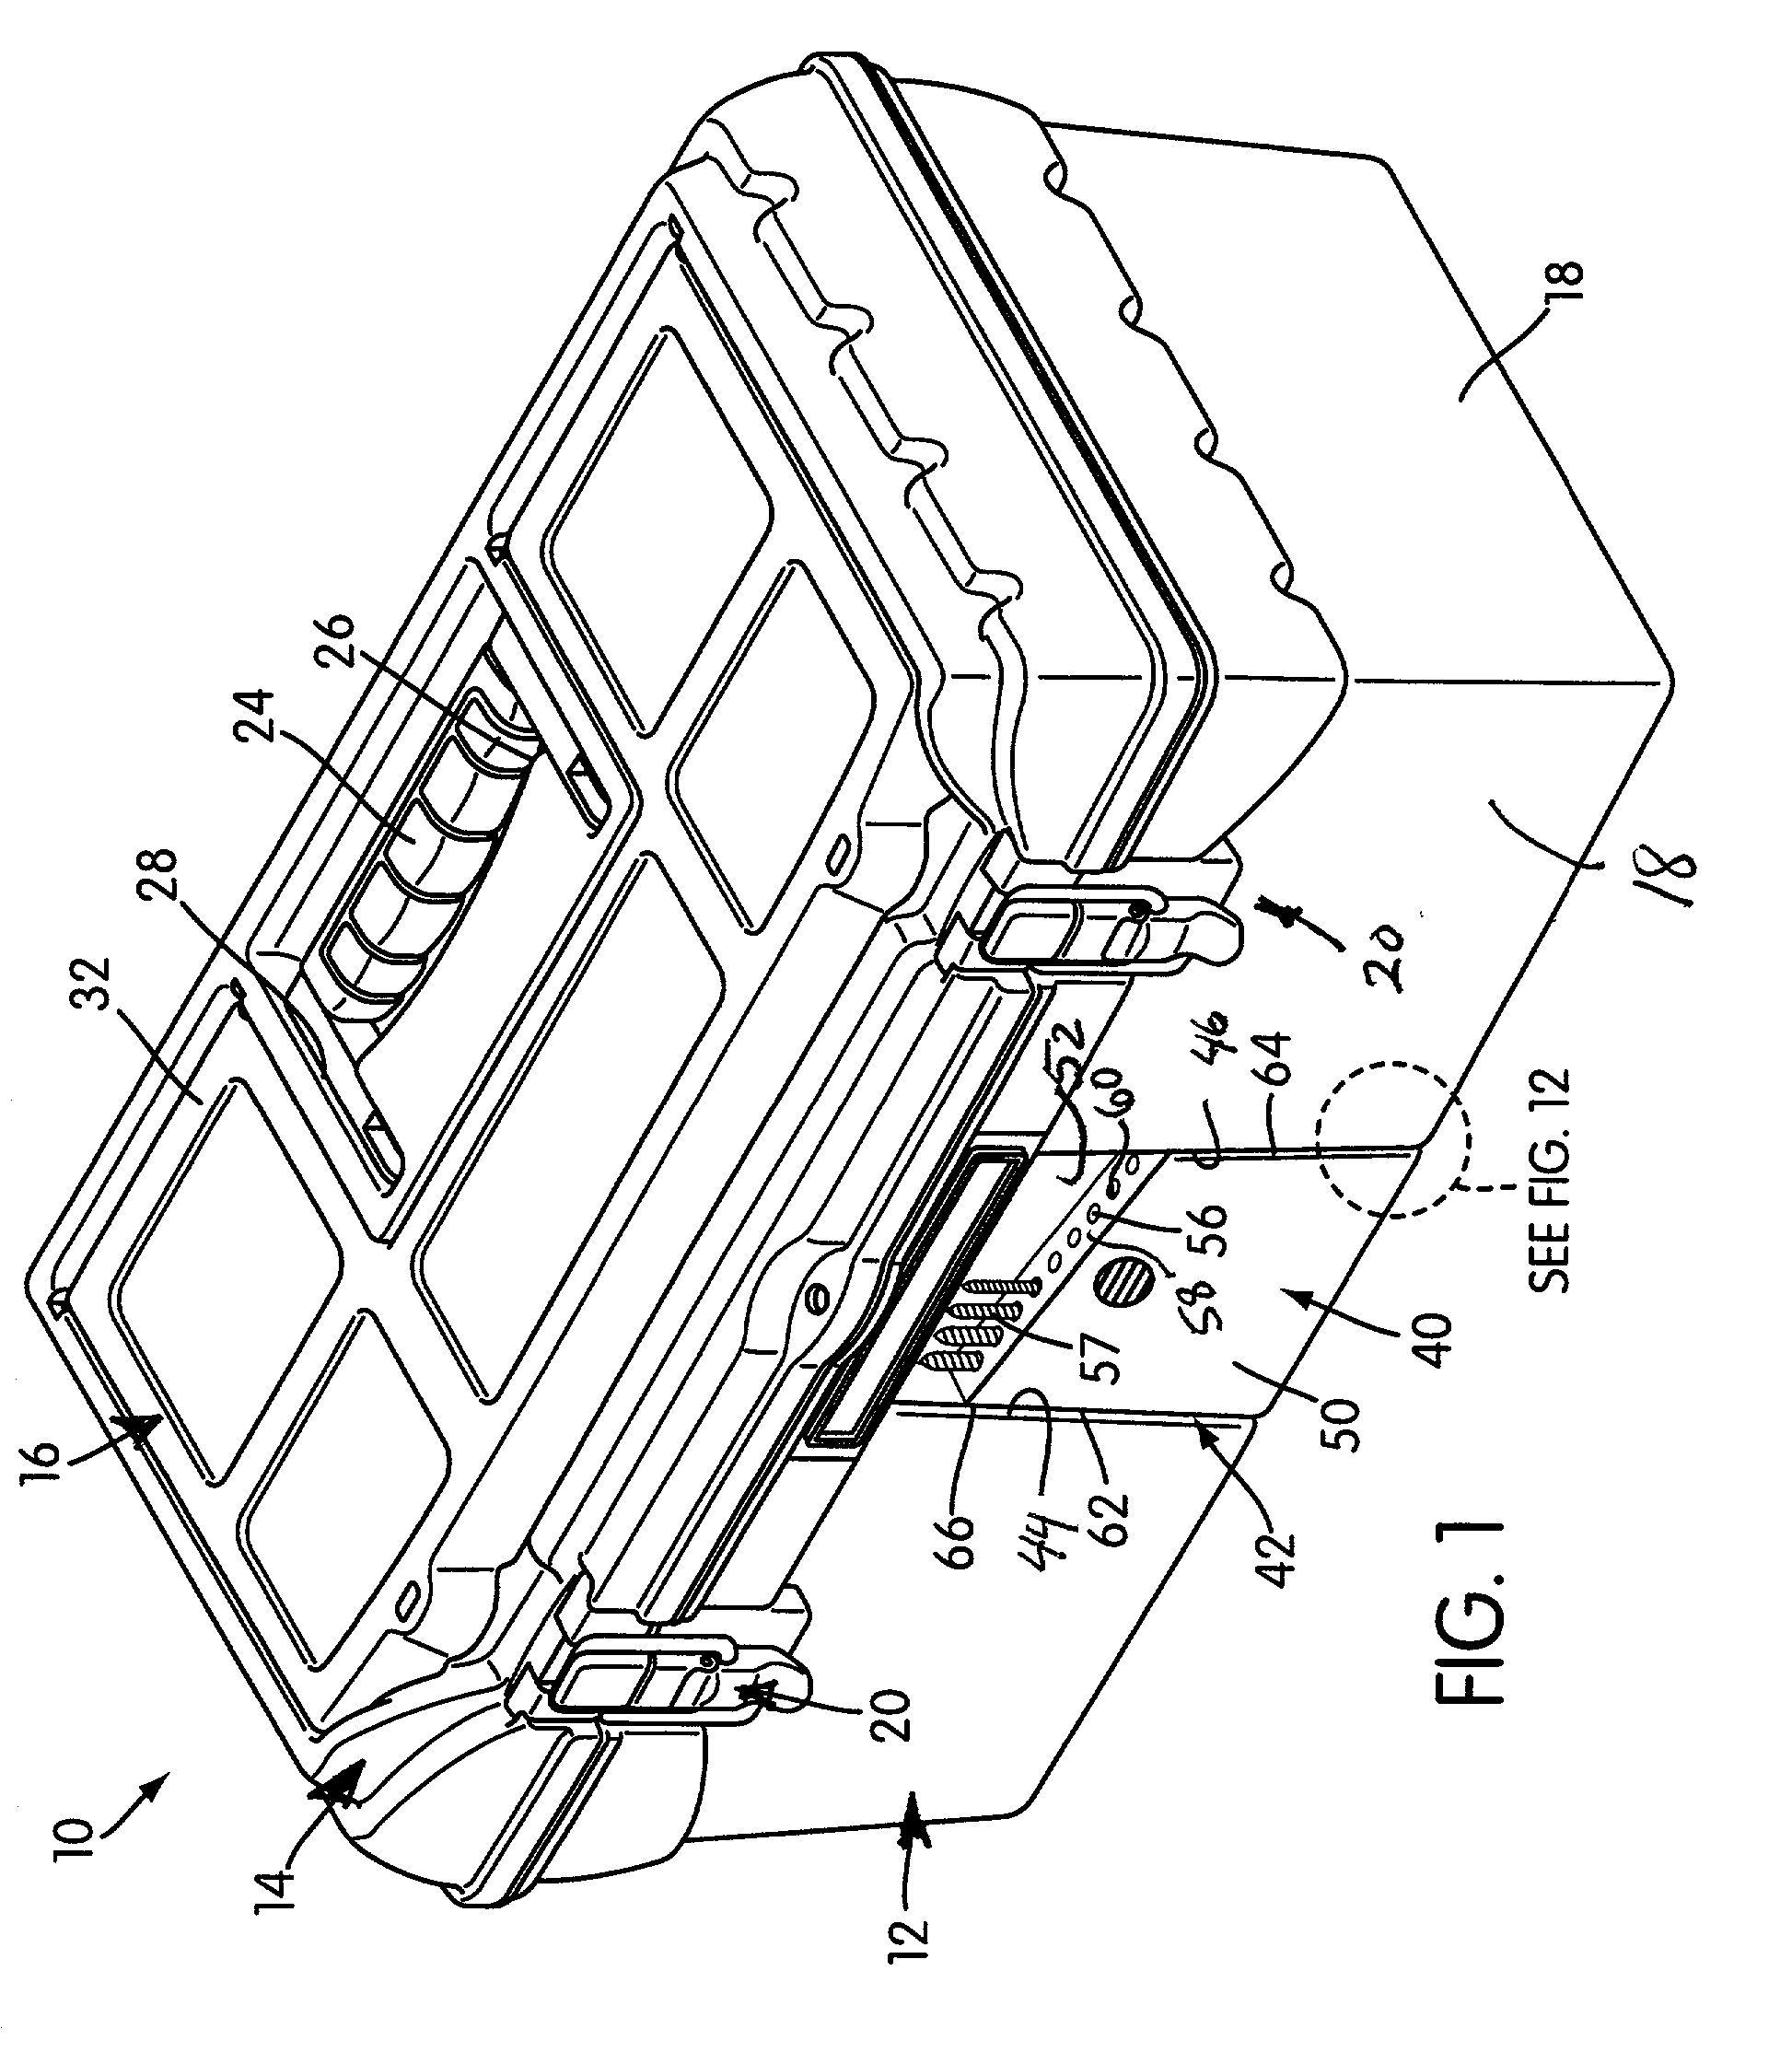 Toolbox with external compartment